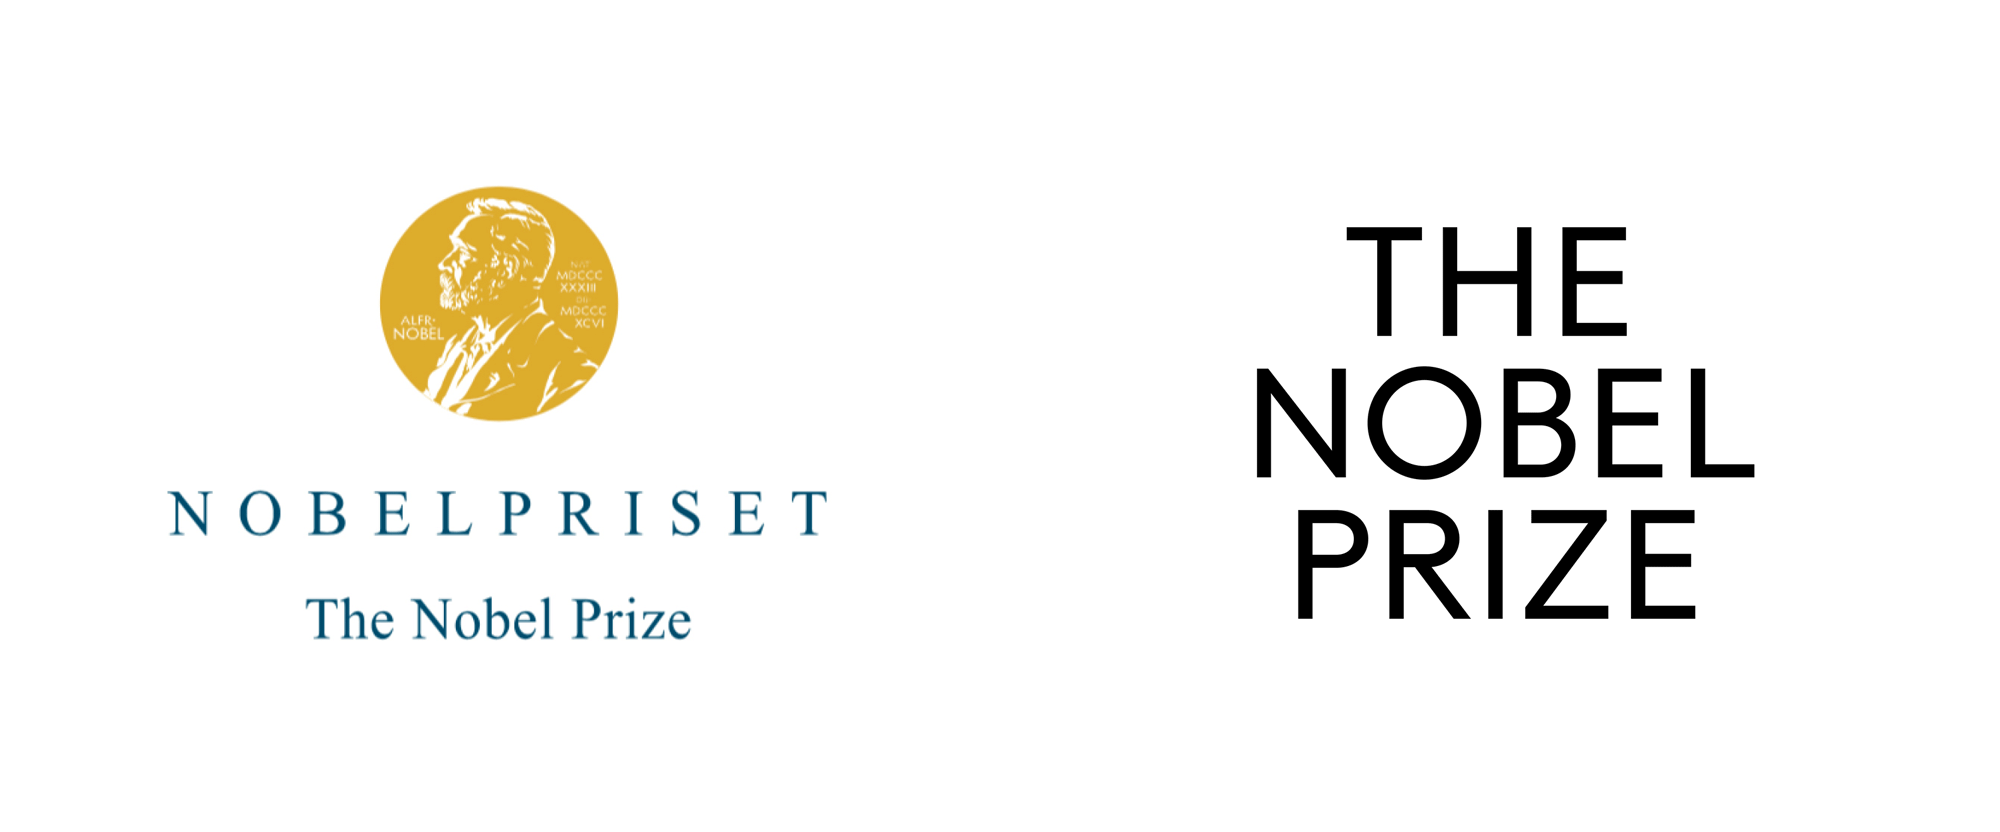 Effort Logo - Brand New: New Logo and Identity for The Nobel Prize by Stockholm ...